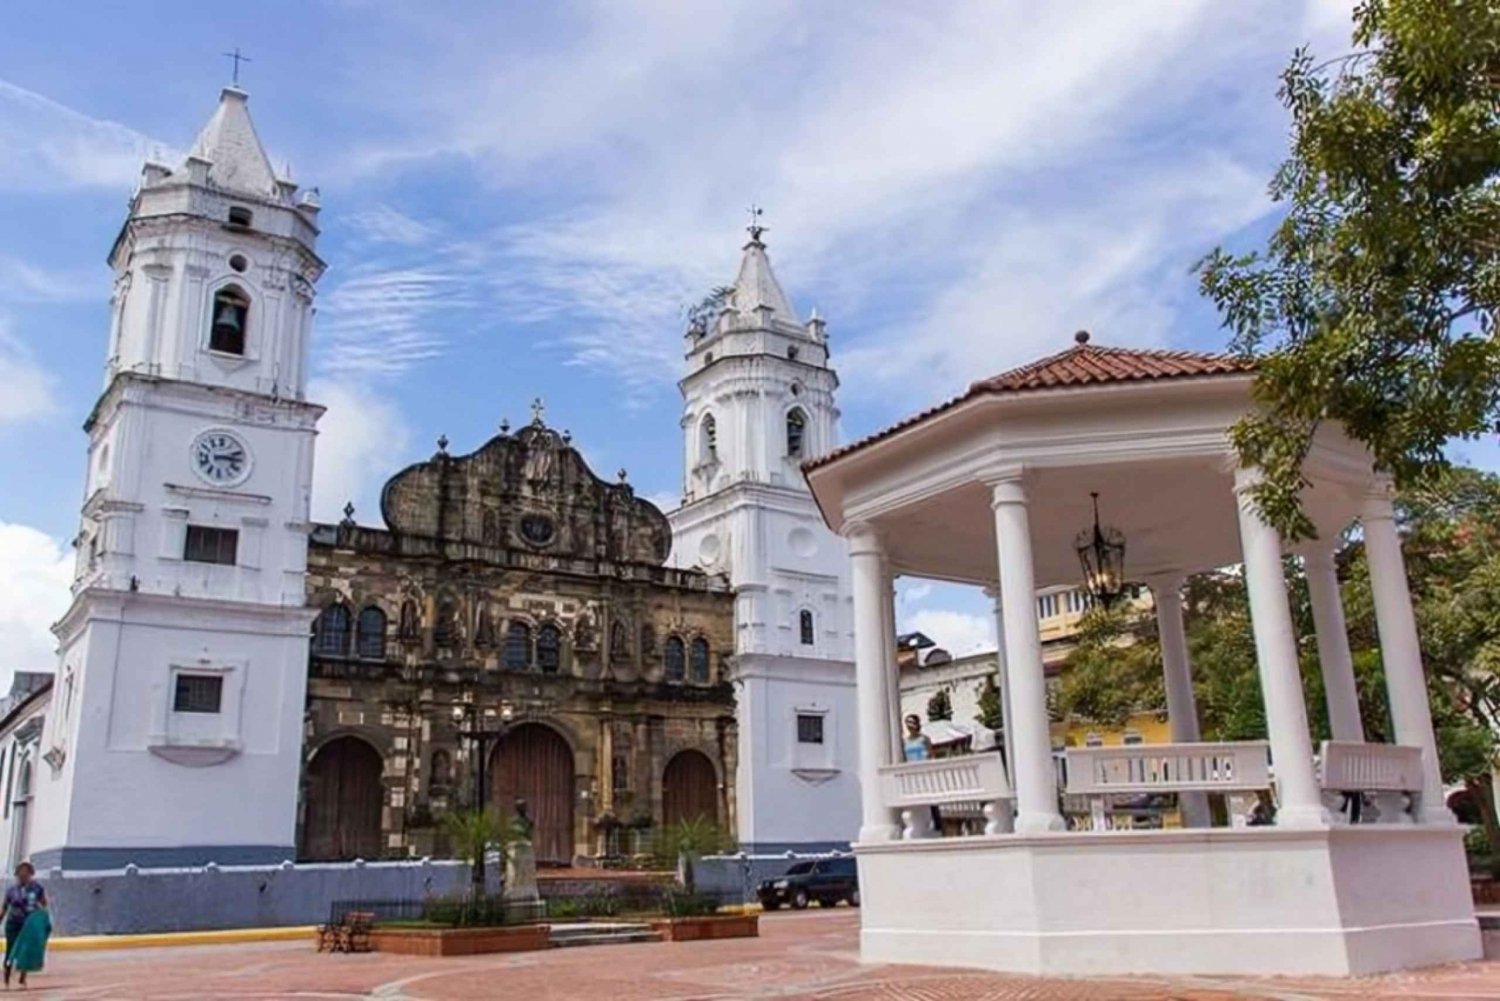 Panama : Must-See Sites Walking Tour With A Guide